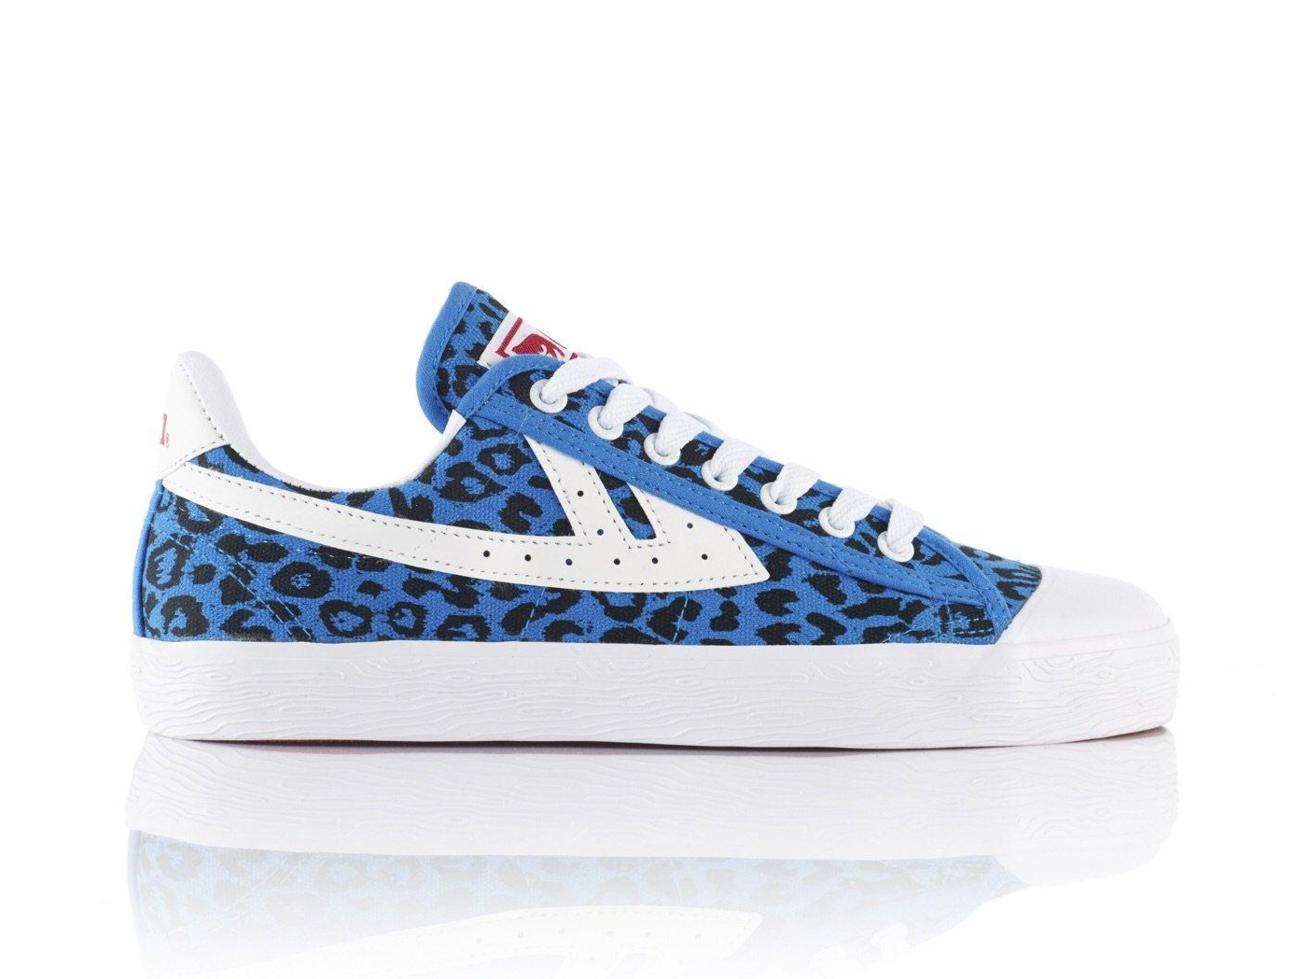 WARRIOR x OBEY Classic Shoes - Leopard Sky Azure